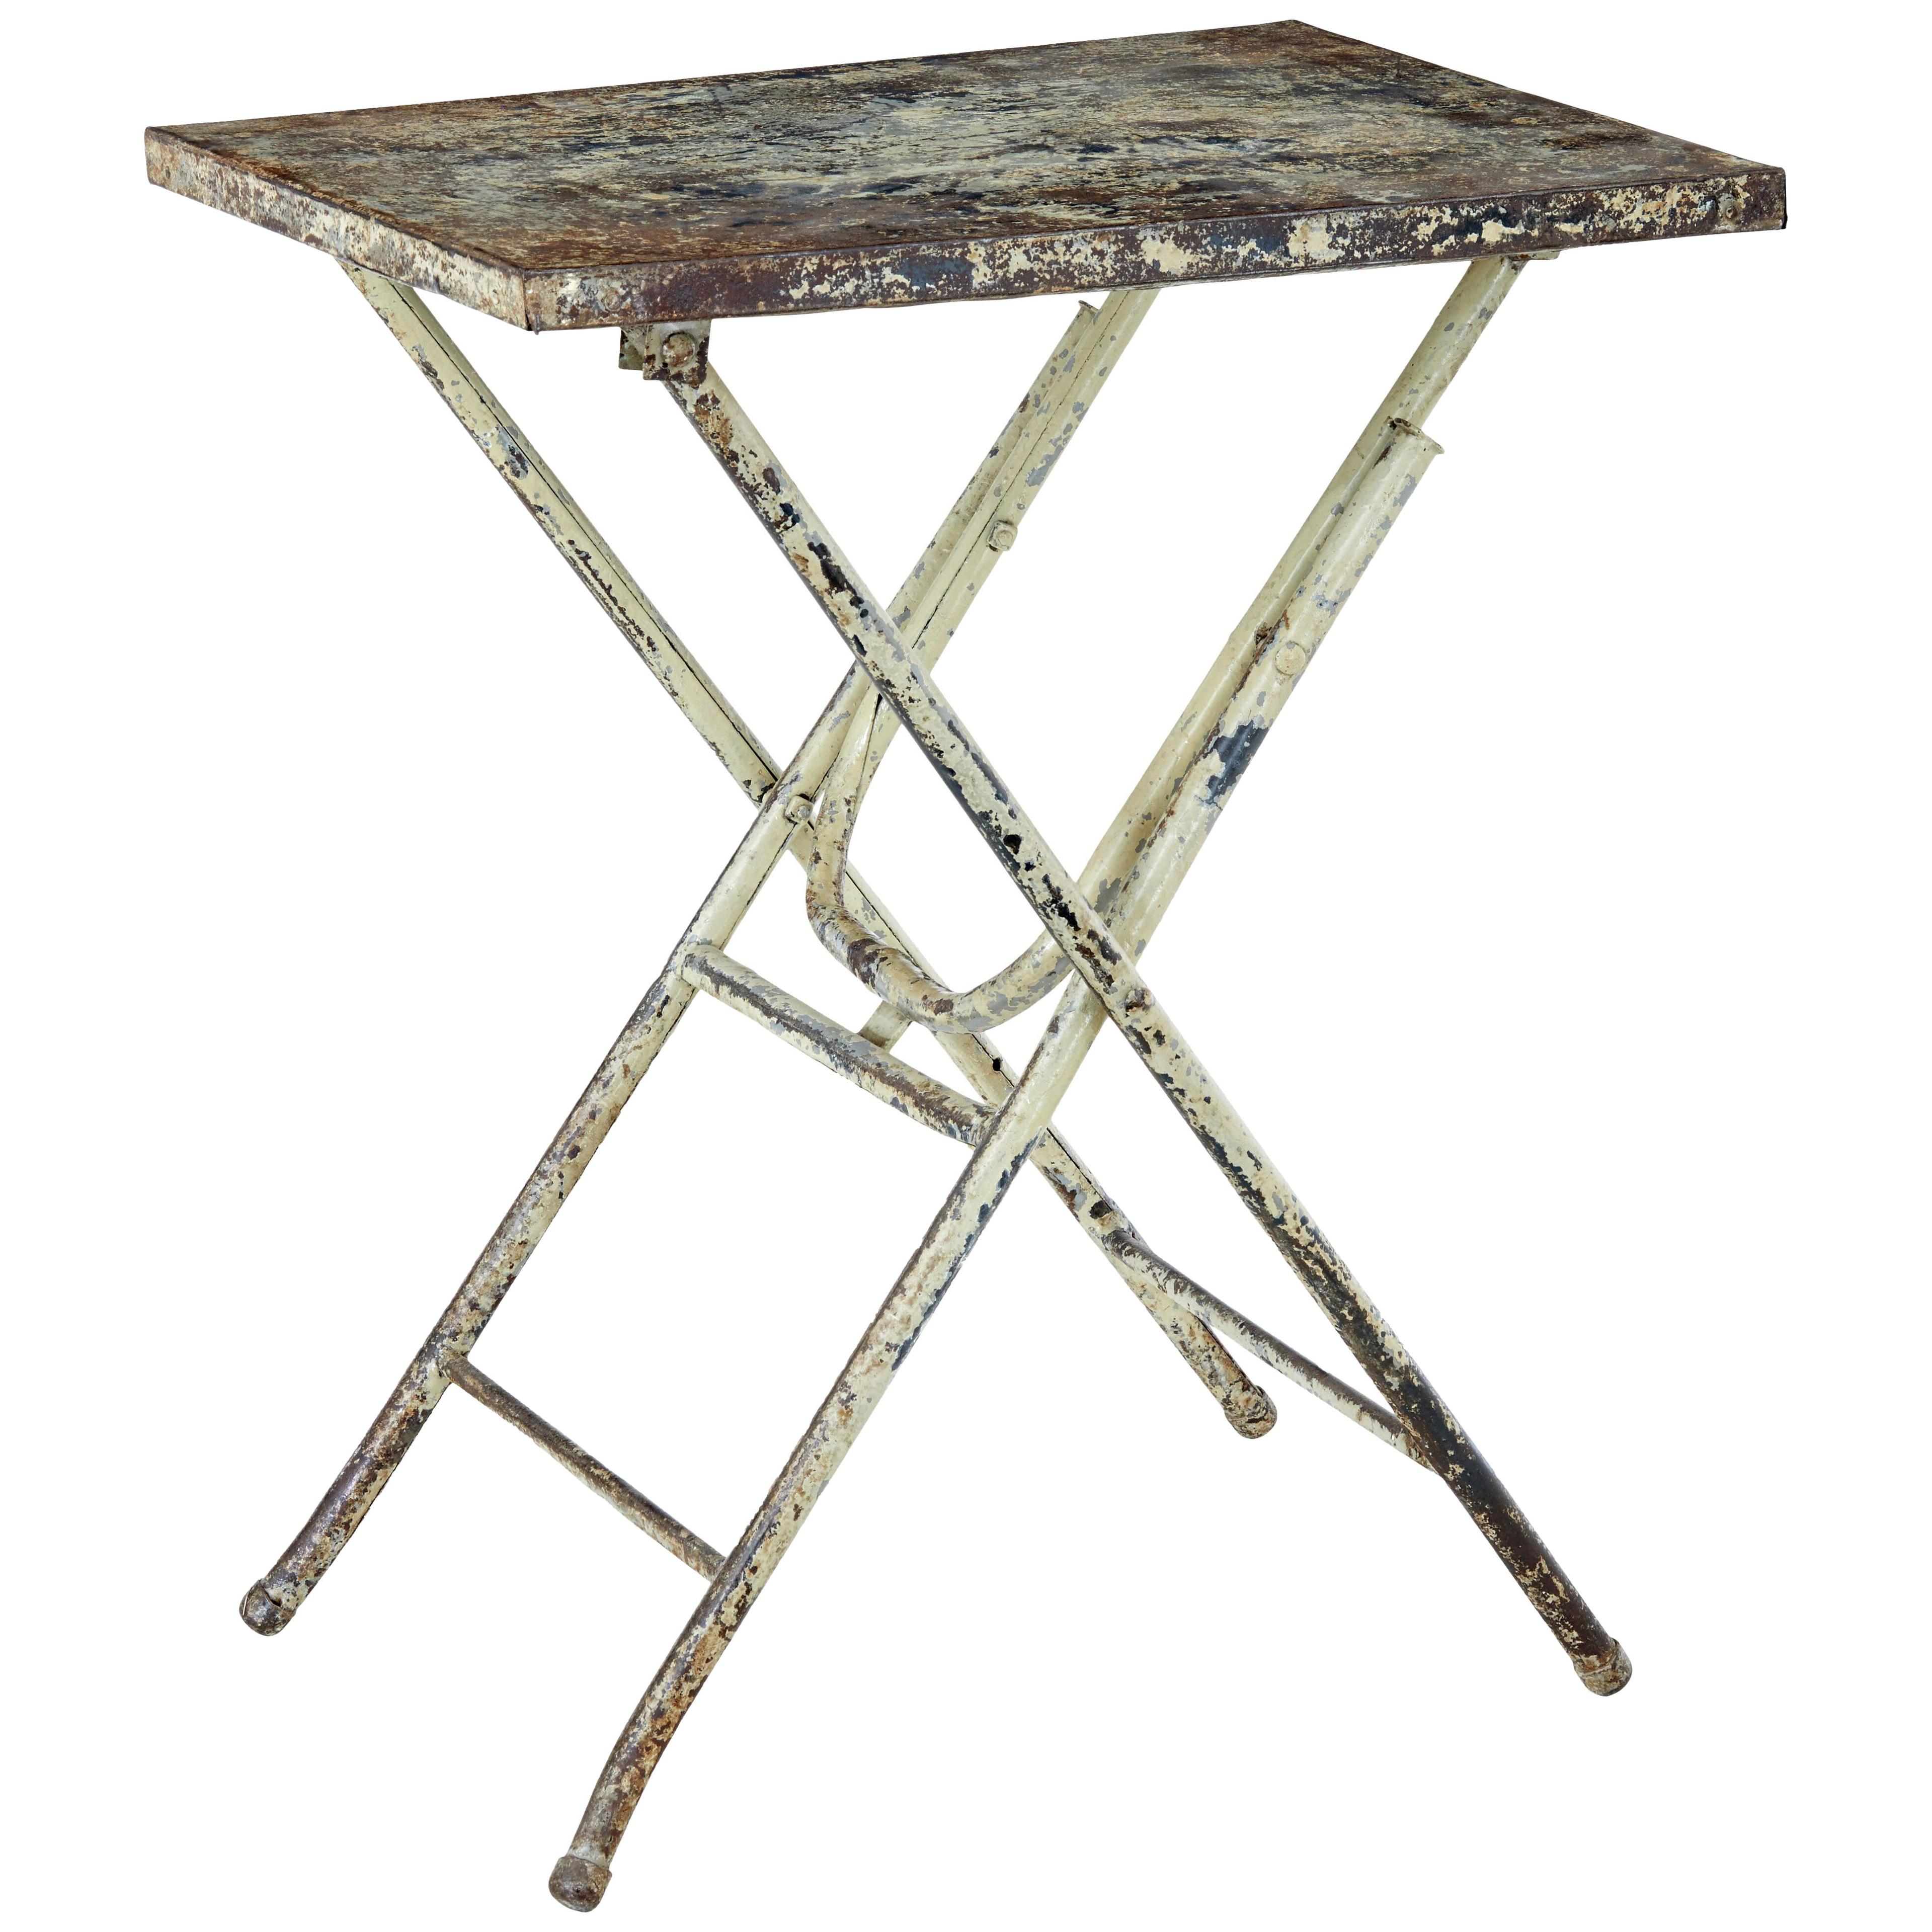 MID CENTURY INDUSTRIAL FOLDING SIDE TABLE